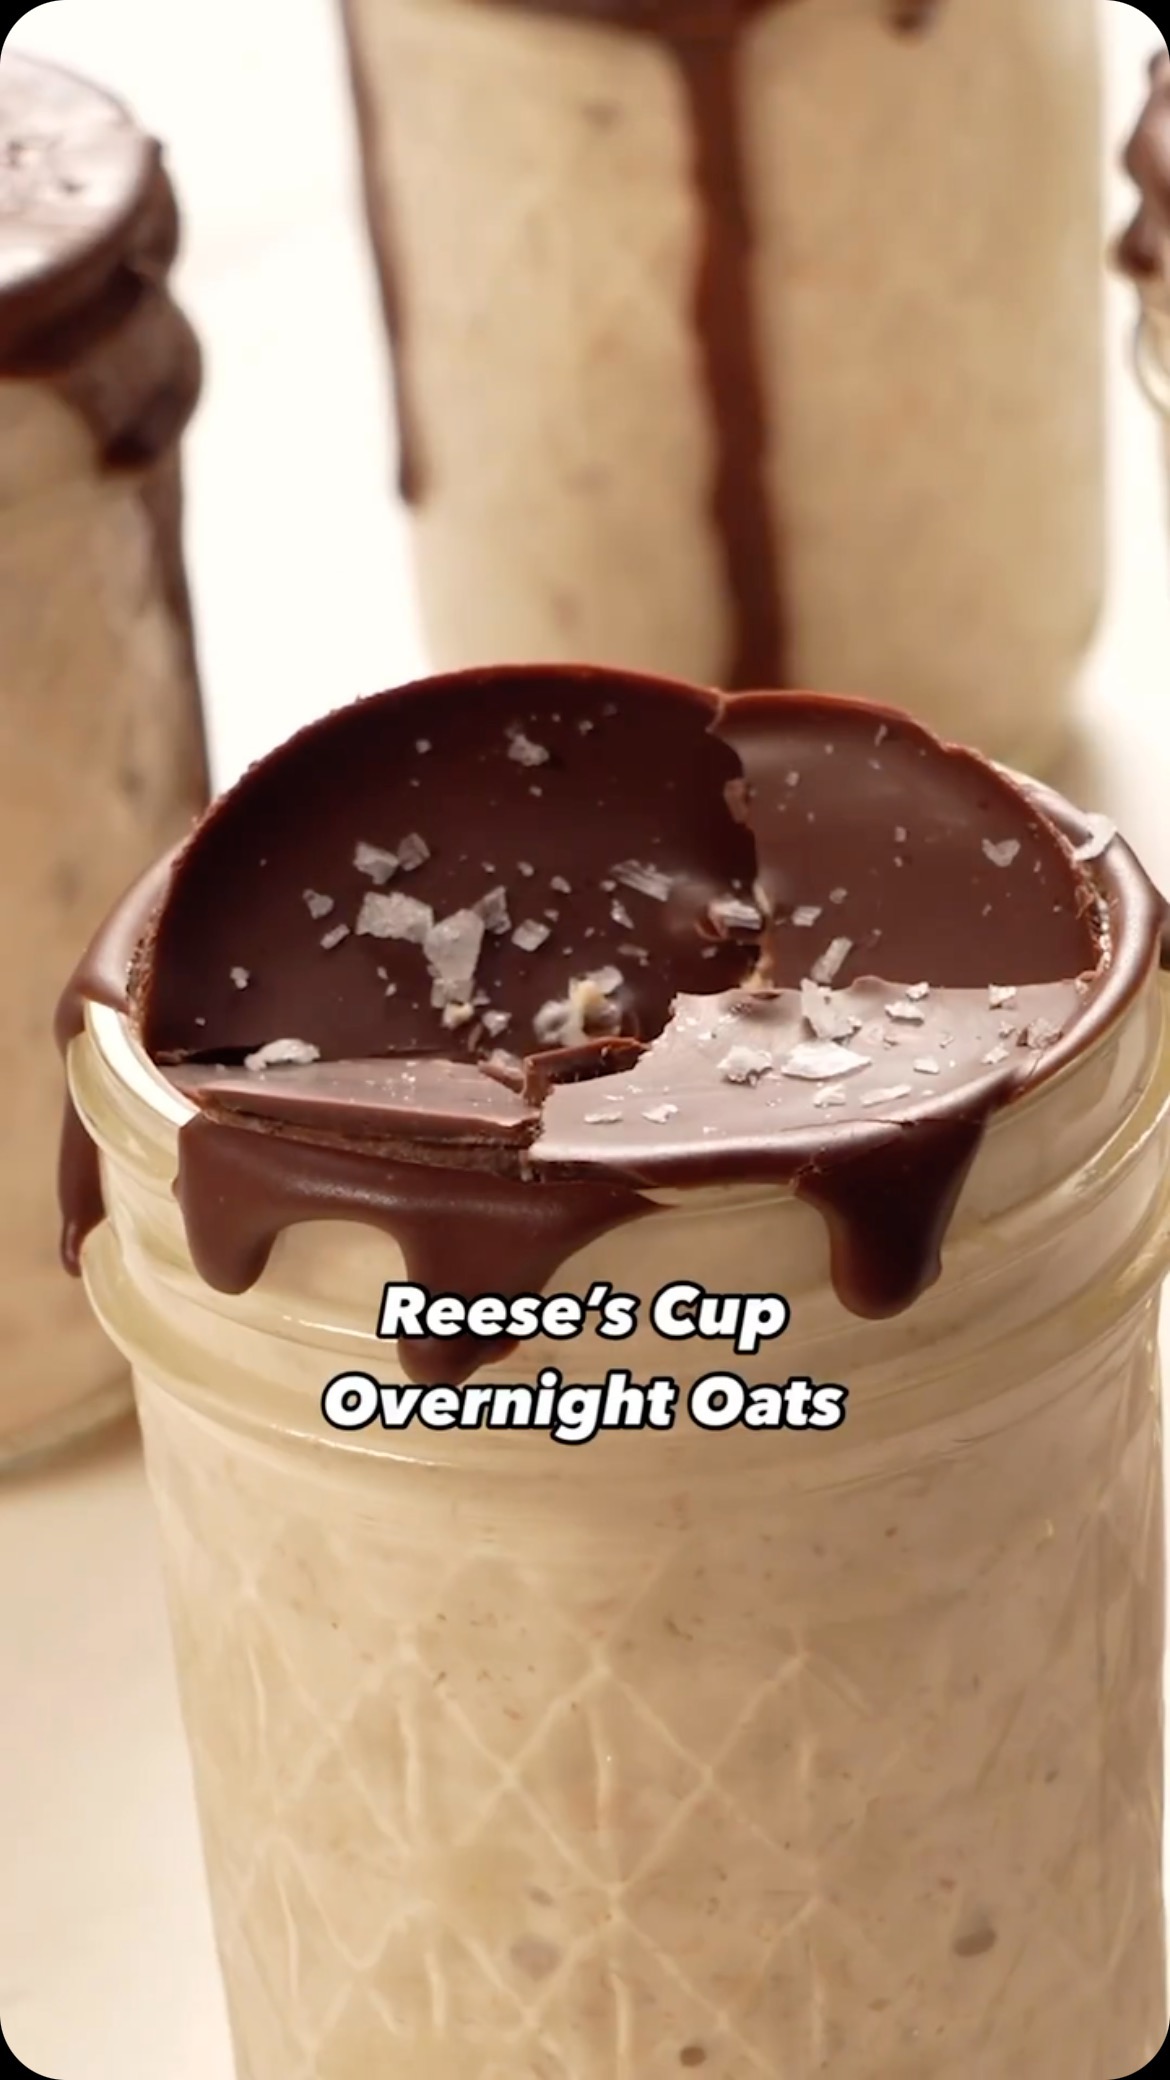 These overnight oats taste just like a Reese’s cup